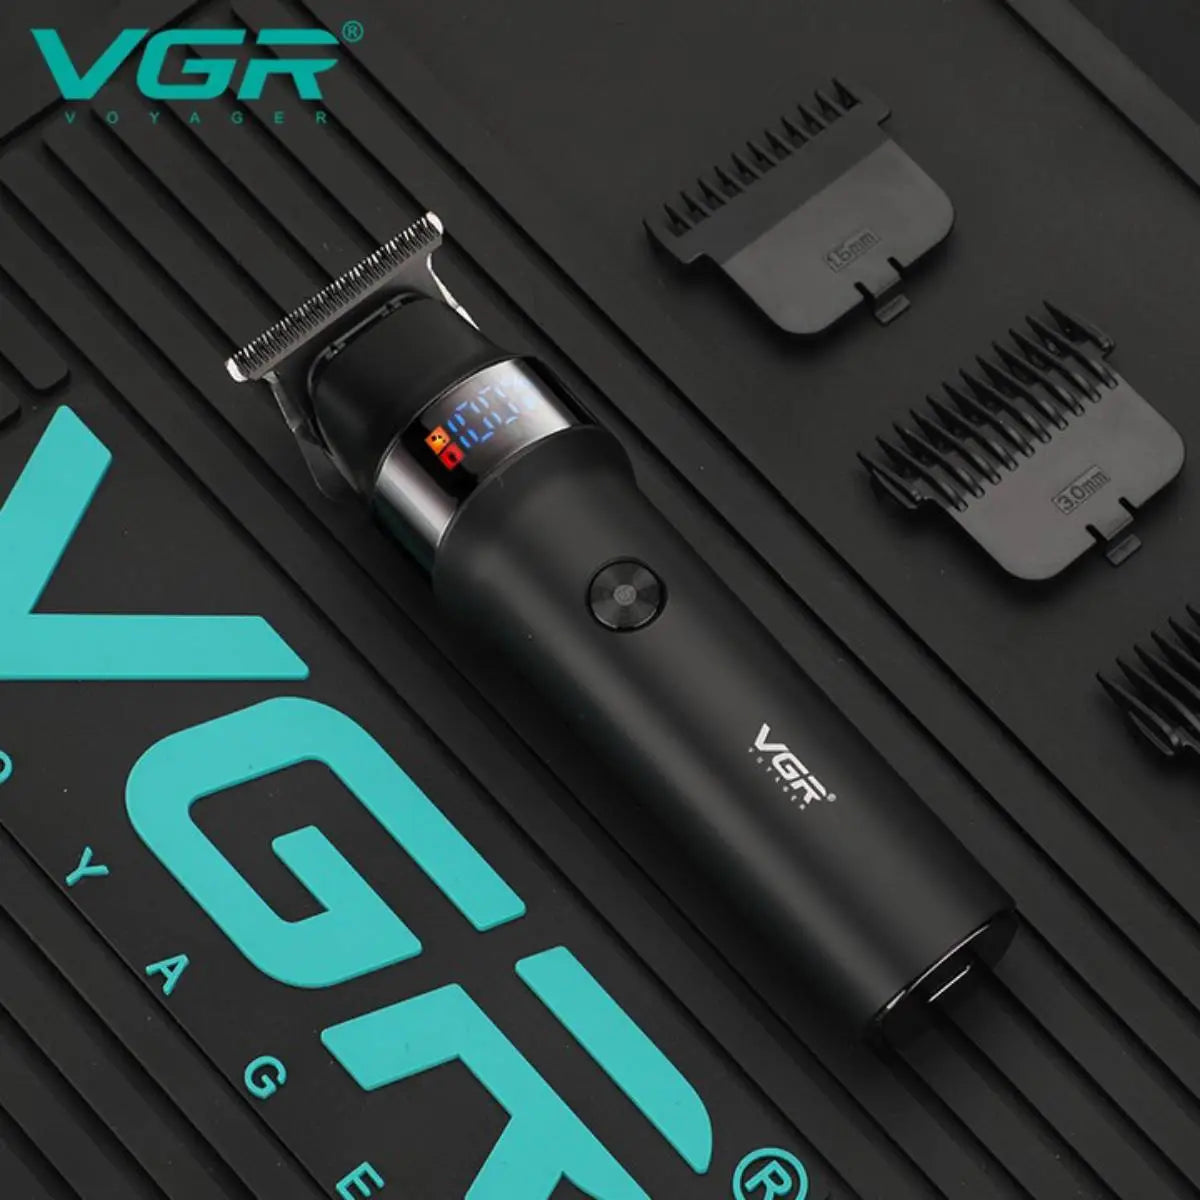 VGR V-987 Professional Hair Trimmer with LED Display, Turbo Mode, and 400-Minute Runtime, Black